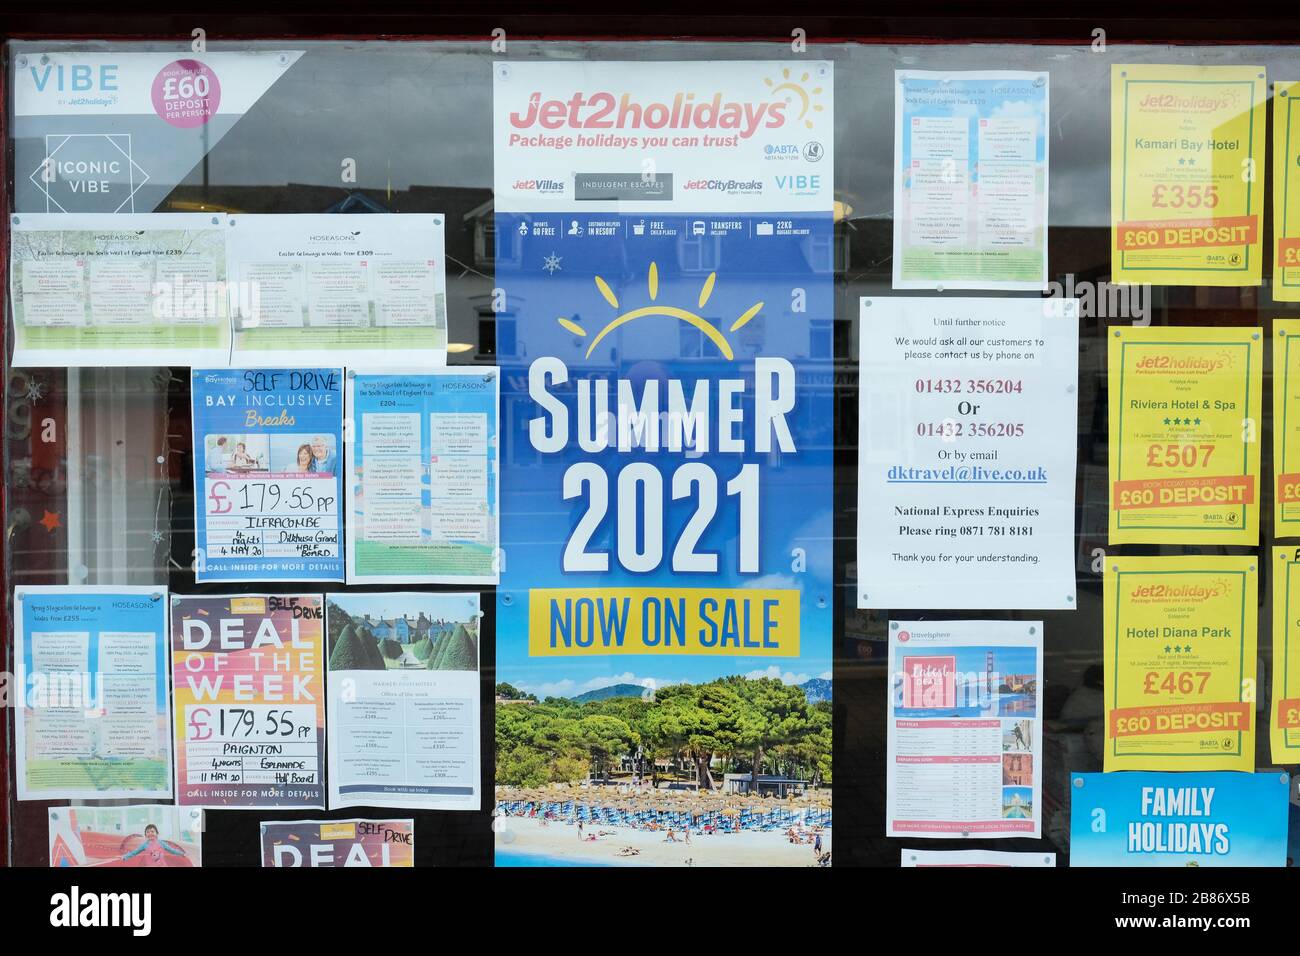 Hereford, Herefordshire, UK - Friday 20th March 2020 - Local independent travel agent now promoting Summer Holiday for next year 2021 as travel related business collapses this year 2020 due to the Covid-19 Coronavirus crisis - Photo Steven May / Alamy Live News Stock Photo